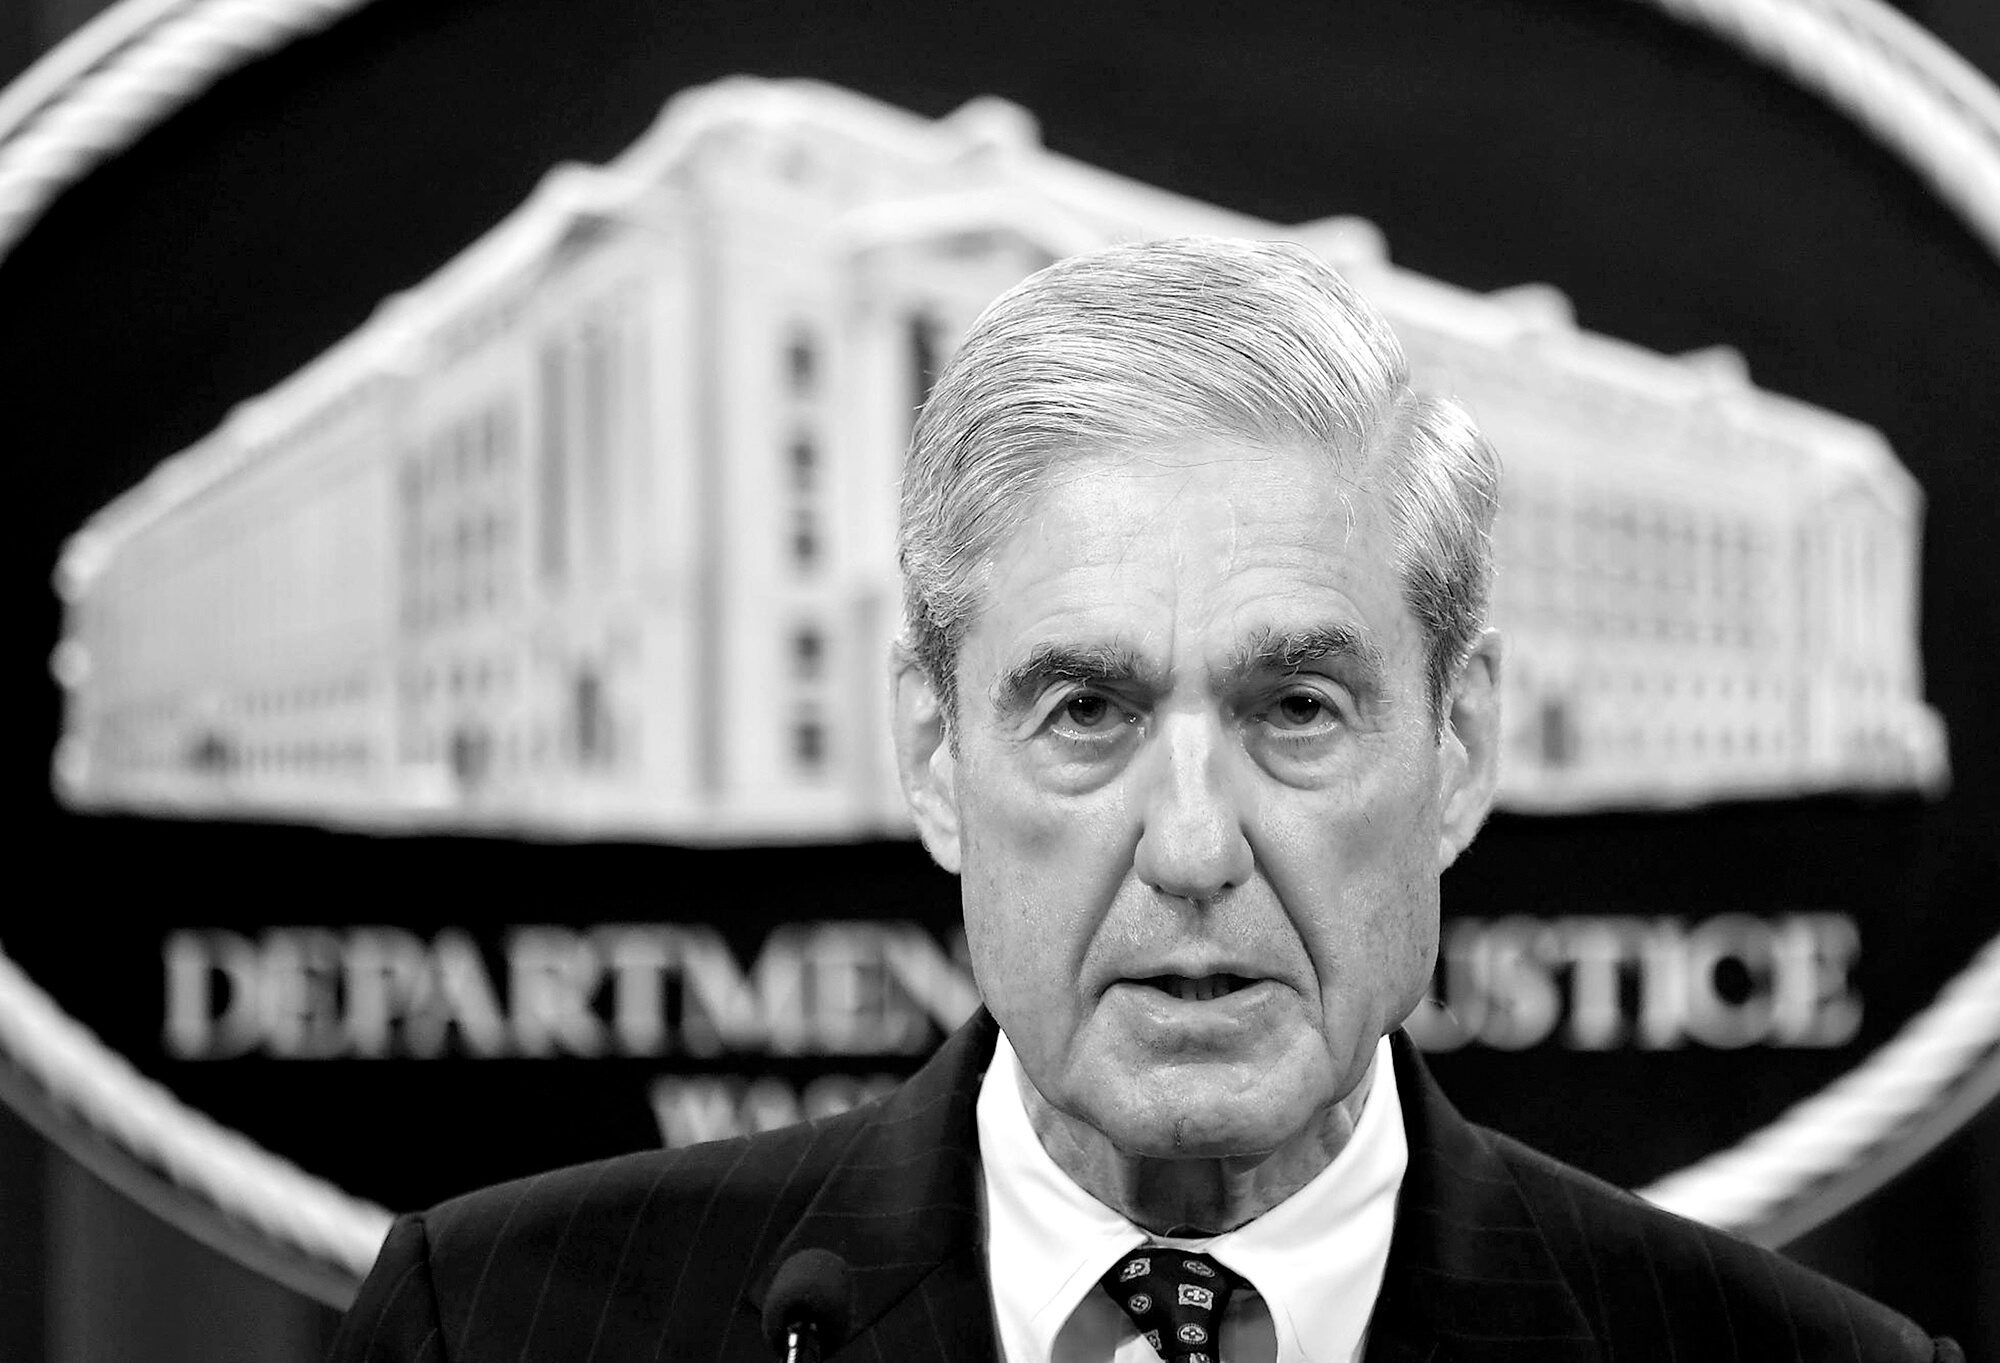 Special counsel Robert Mueller considered himself unable to weigh in on the question of whether the president should be indicted for obstruction of justice because of a Department of Justice policy that advises against indicting sitting presidents. That policy must change.